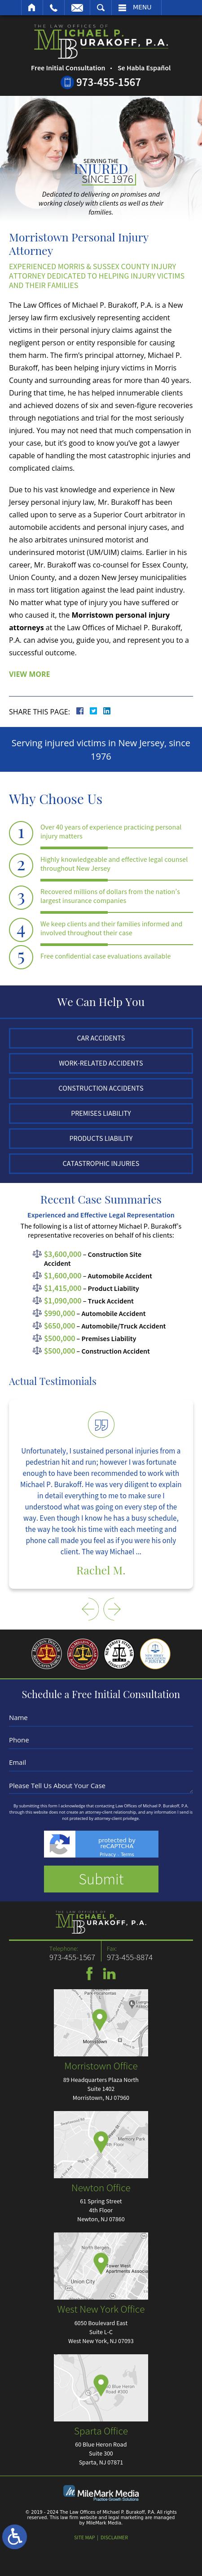 Law Offices of Michael P. Burakoff, P.A. - West New York NJ Lawyers